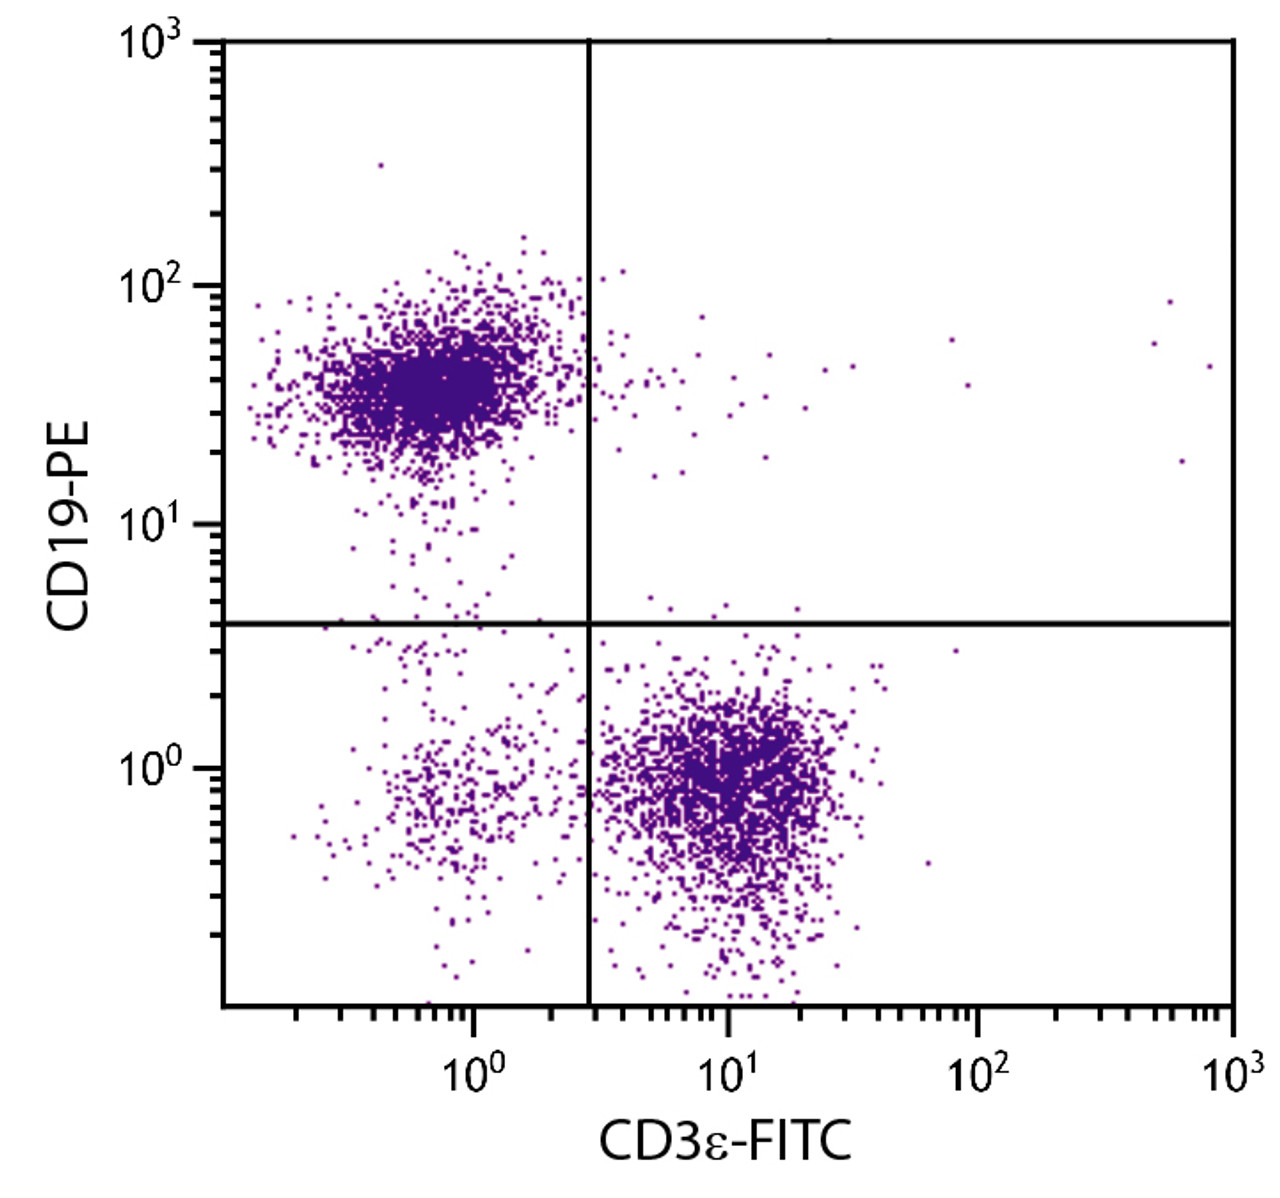 BALB/c mouse splenocytes were stained with Rat Anti-Mouse CD19-PE (Cat. No. 98-660) and Rat Anti-Mouse CD3?-FITC .